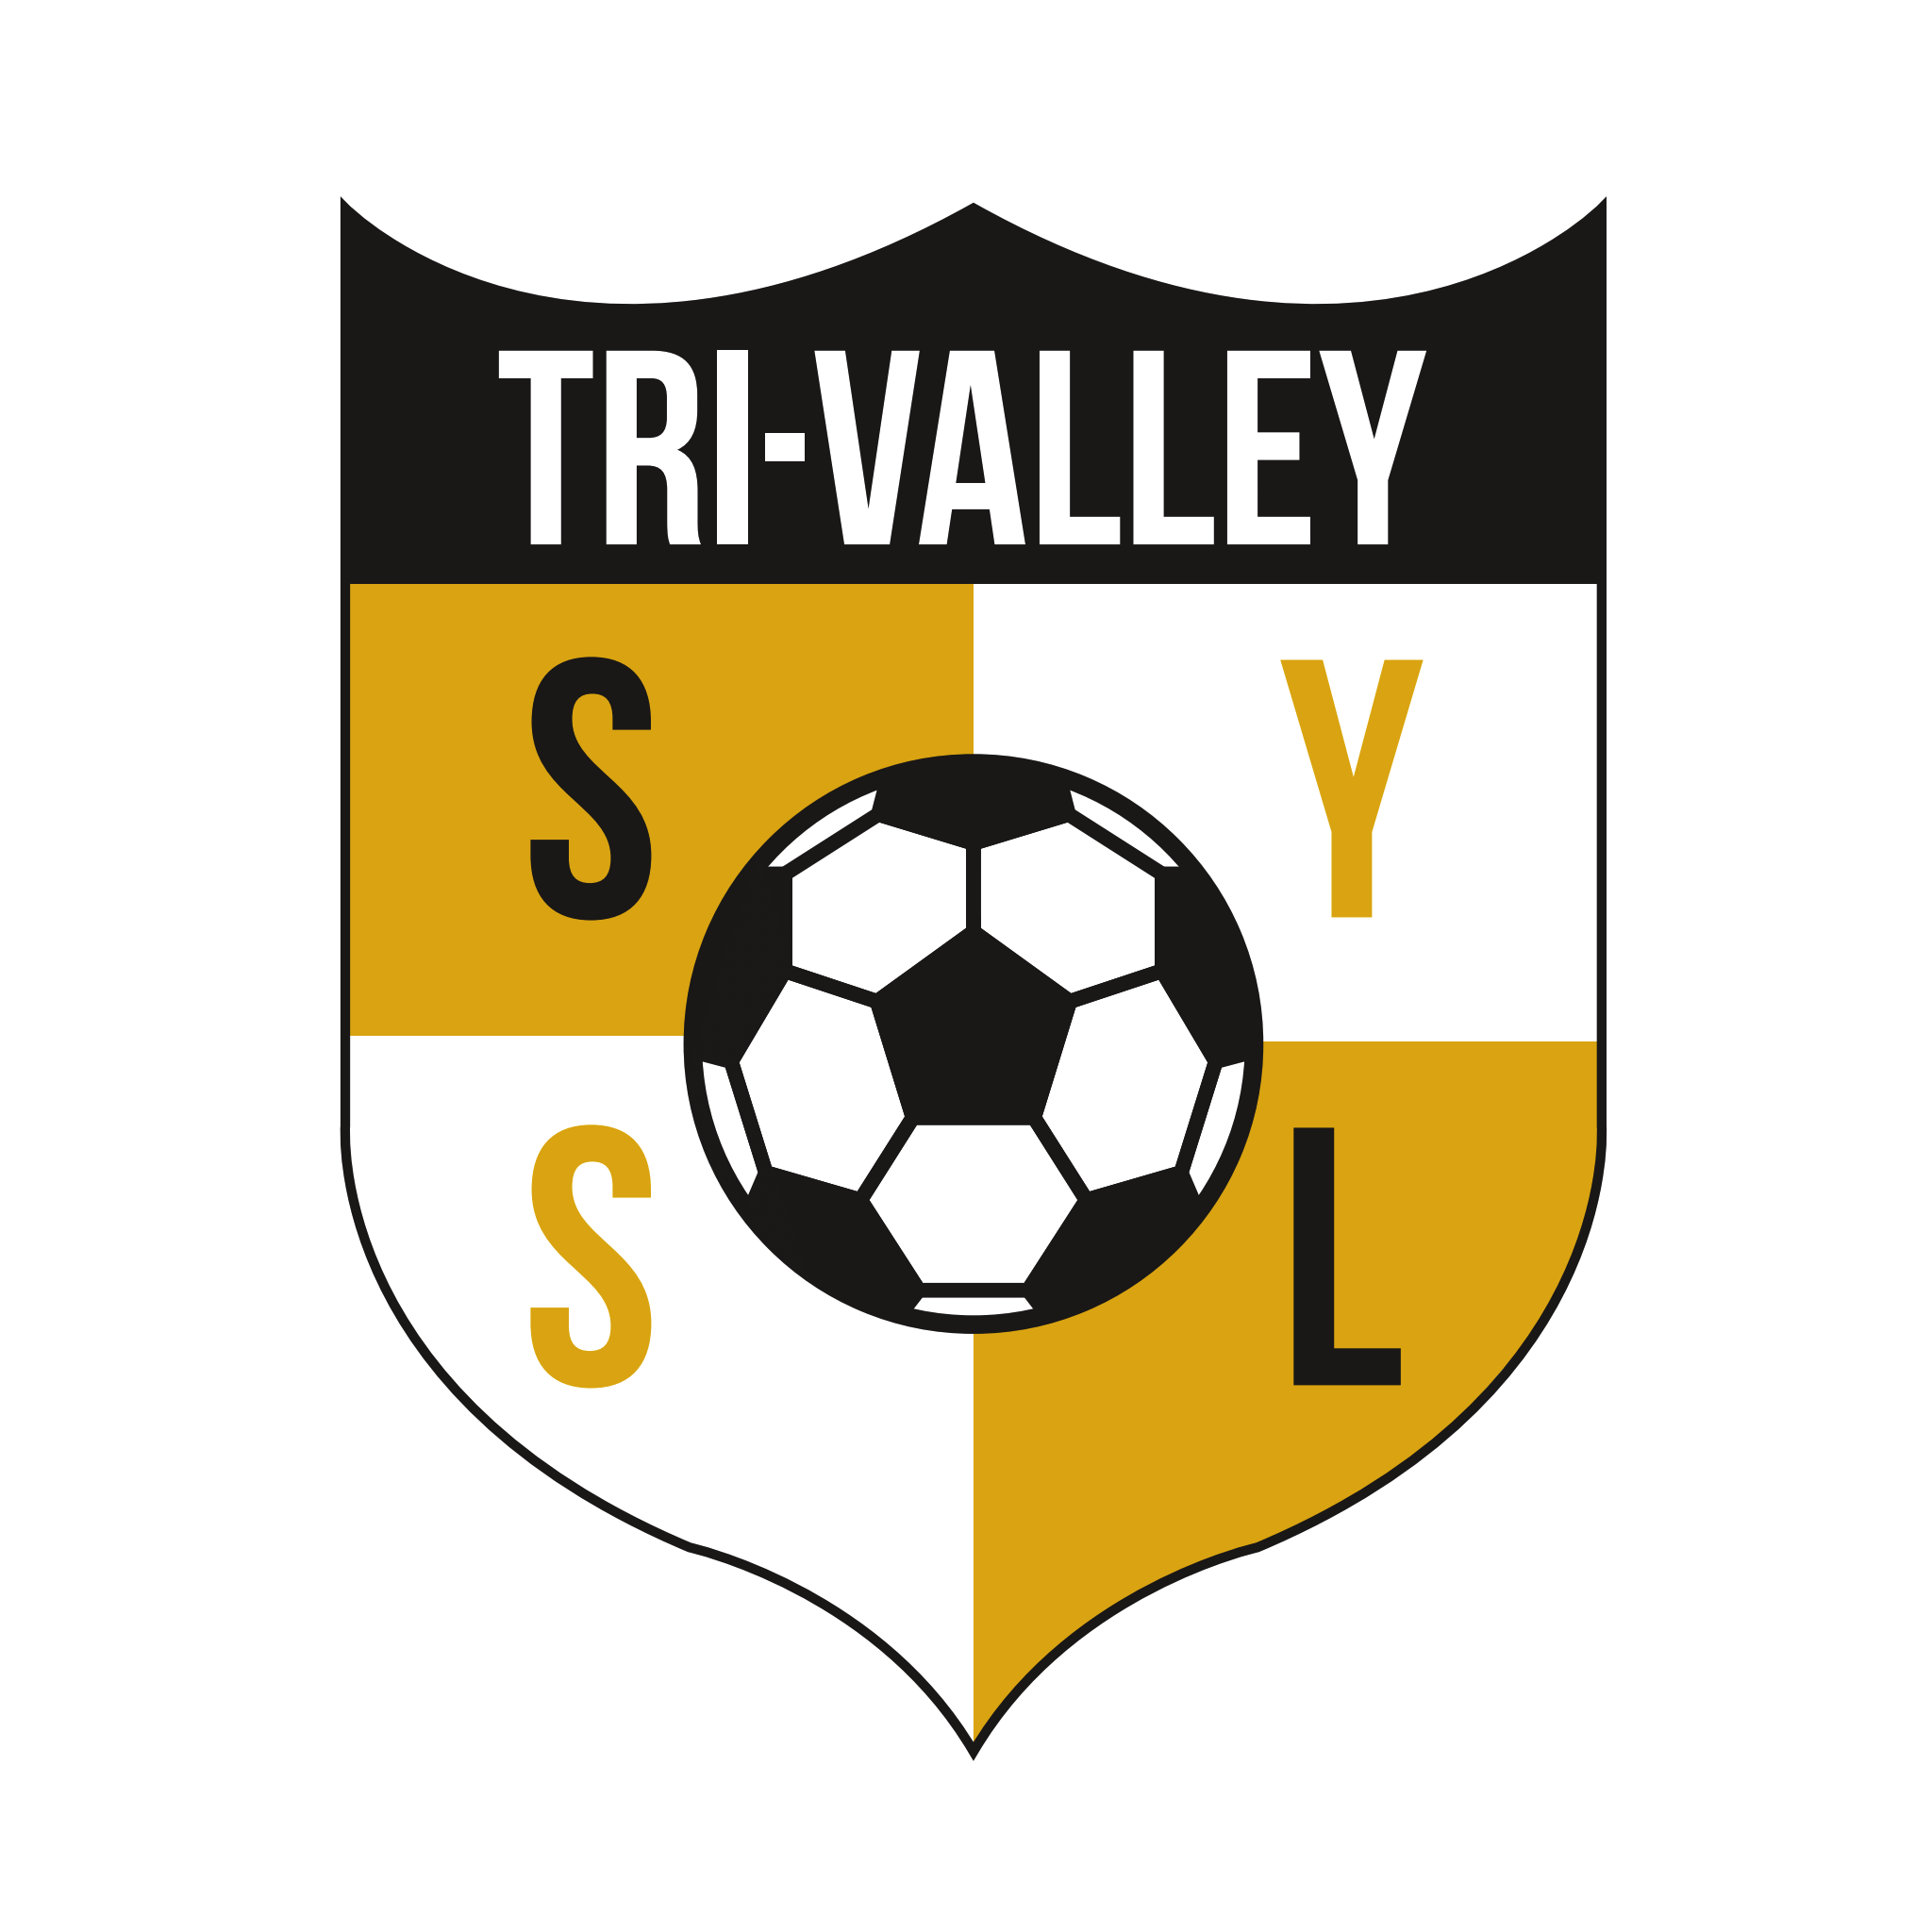 WELCOME TO TRI-VALLEY - SCOTTIE YOUTH SOCCER LEAGUE